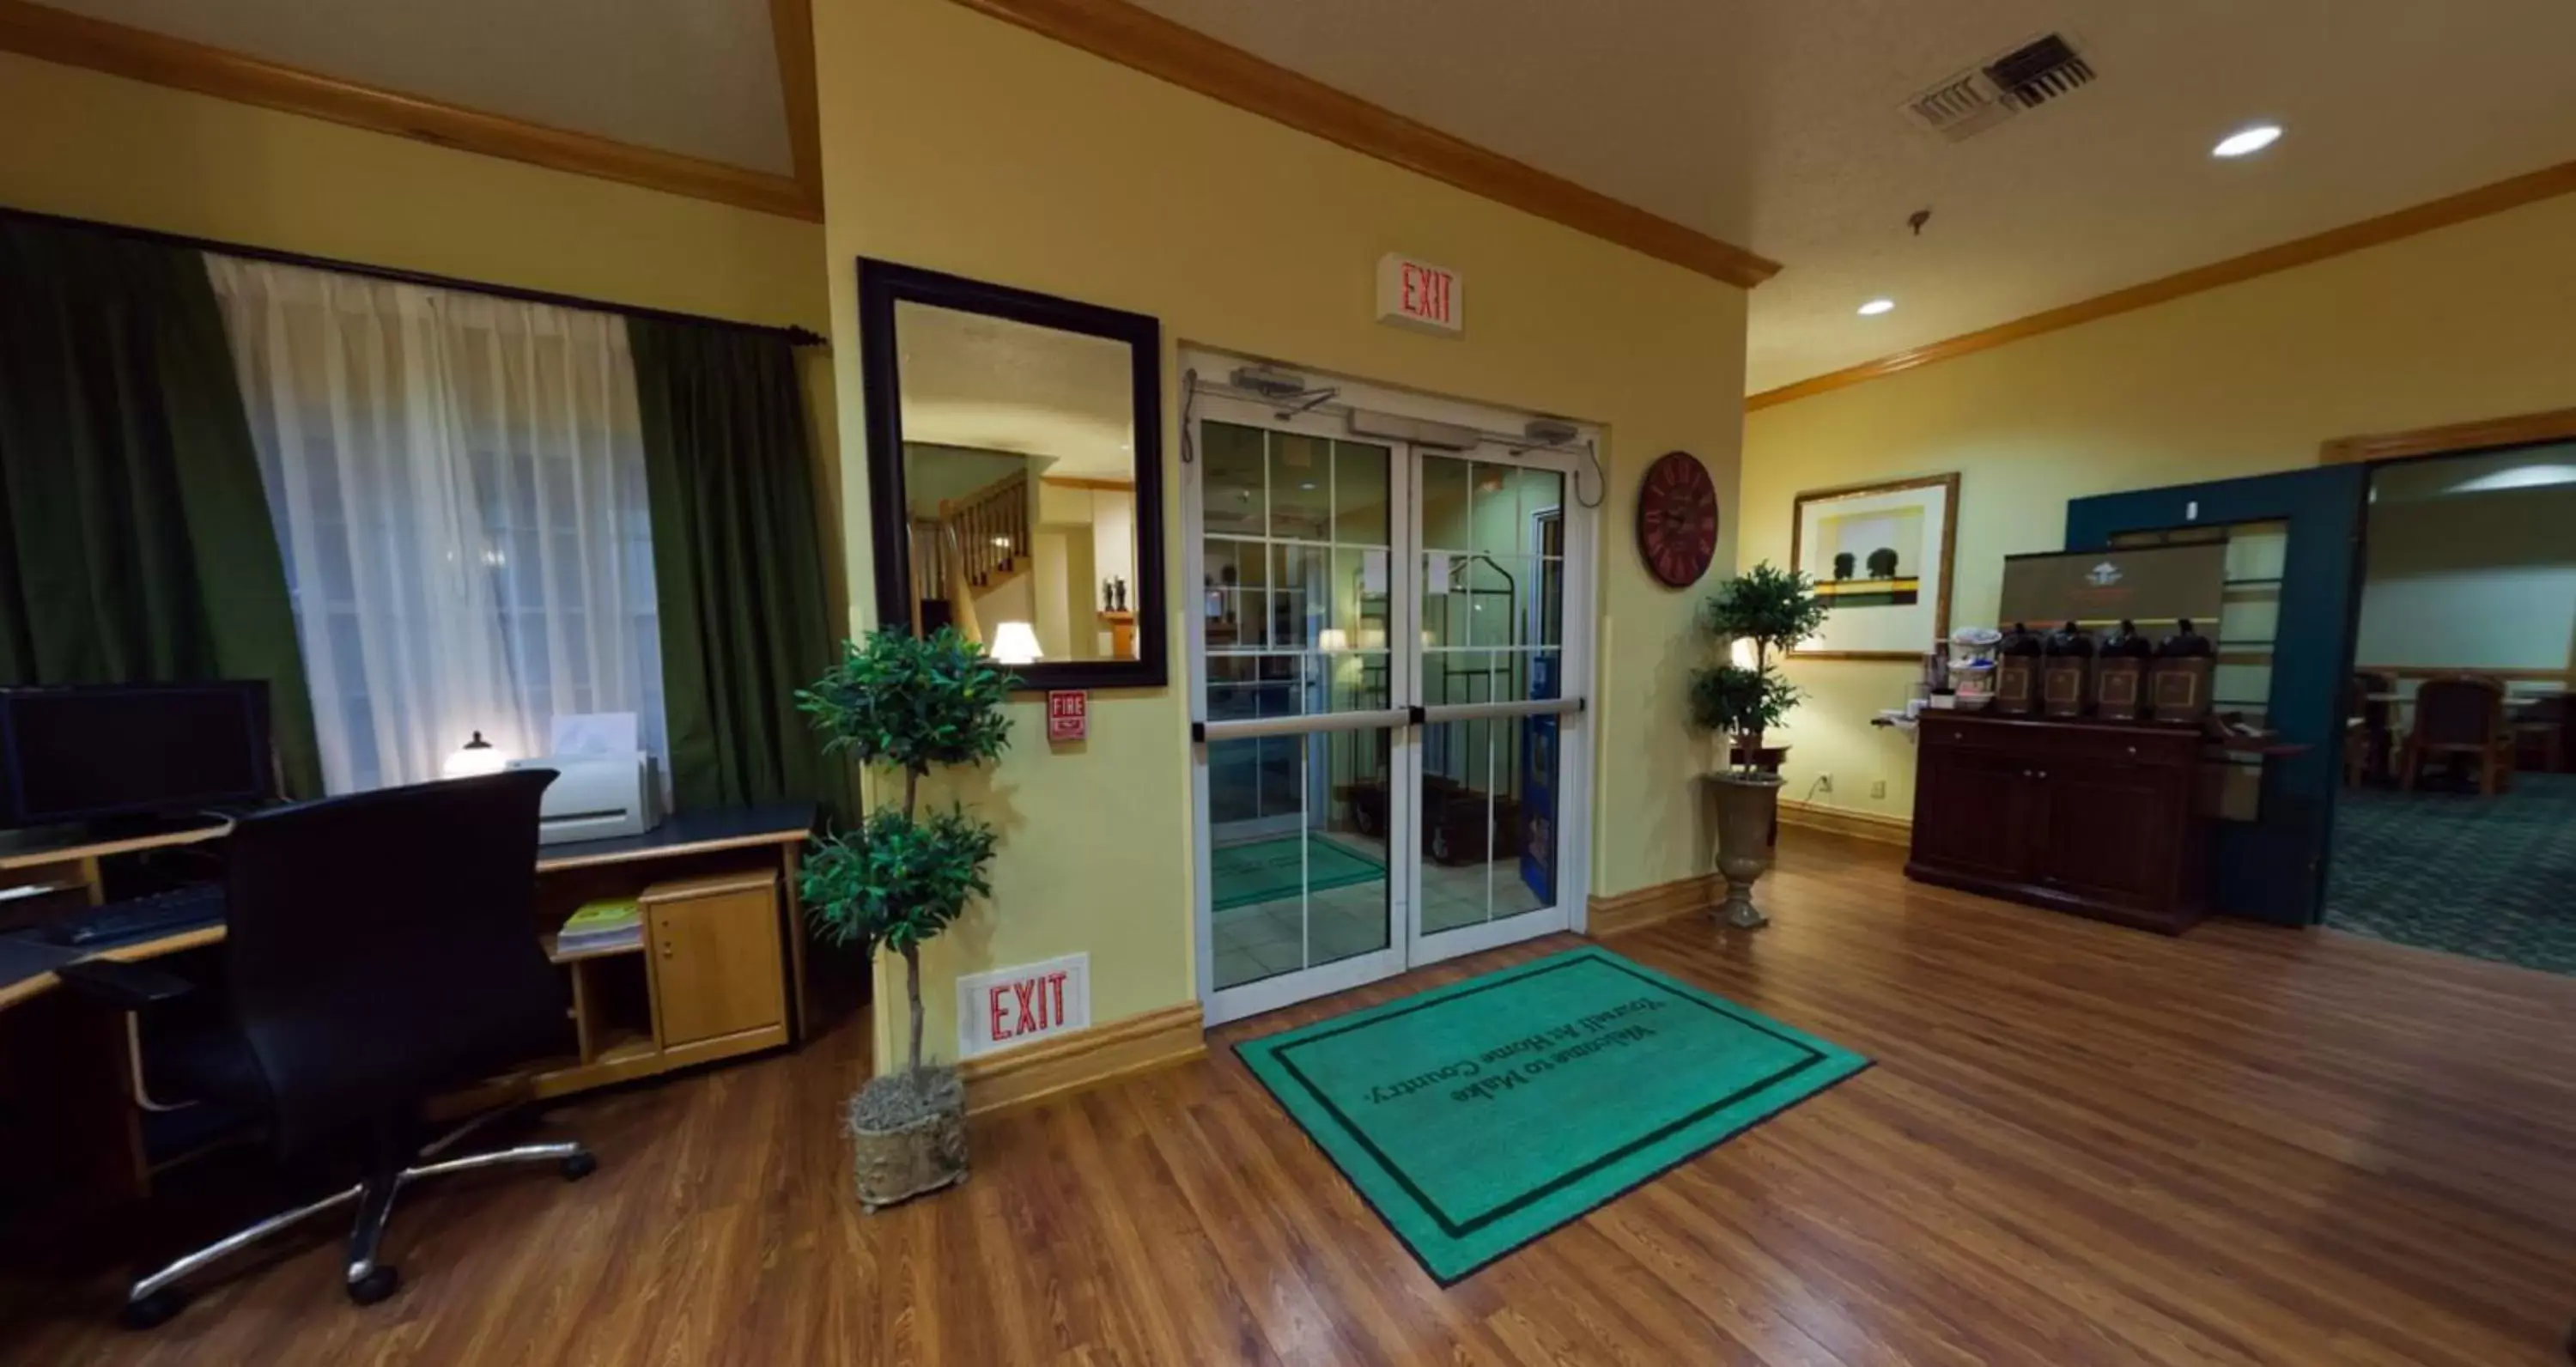 Lobby or reception in Country Inn & Suites by Radisson, Salina, KS